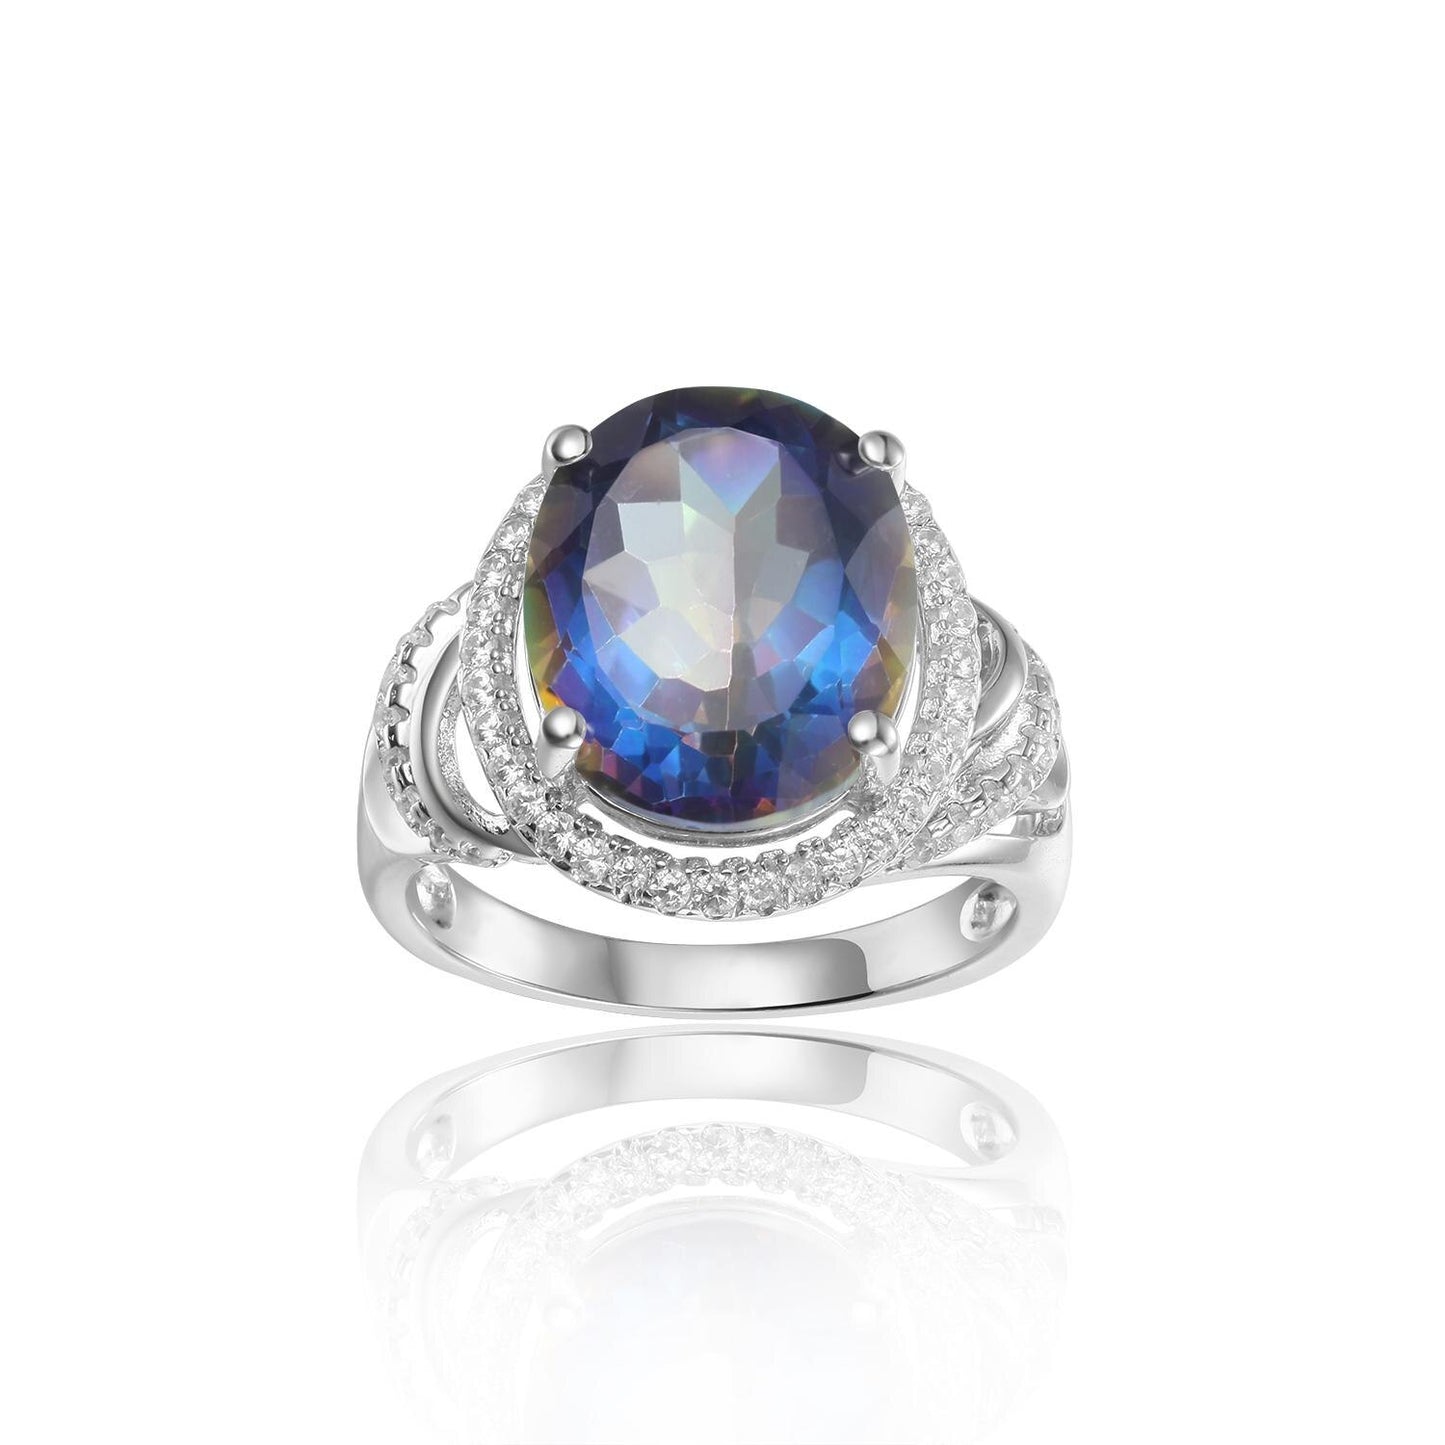 GEM&#39;S BALLET 4.36Ct 10x12mm Stunning Rainbow Mystic Topaz Birthstone Cocktail Rings in 925 Sterling Silver Gift For Her Blueish|925 Sterling Silver